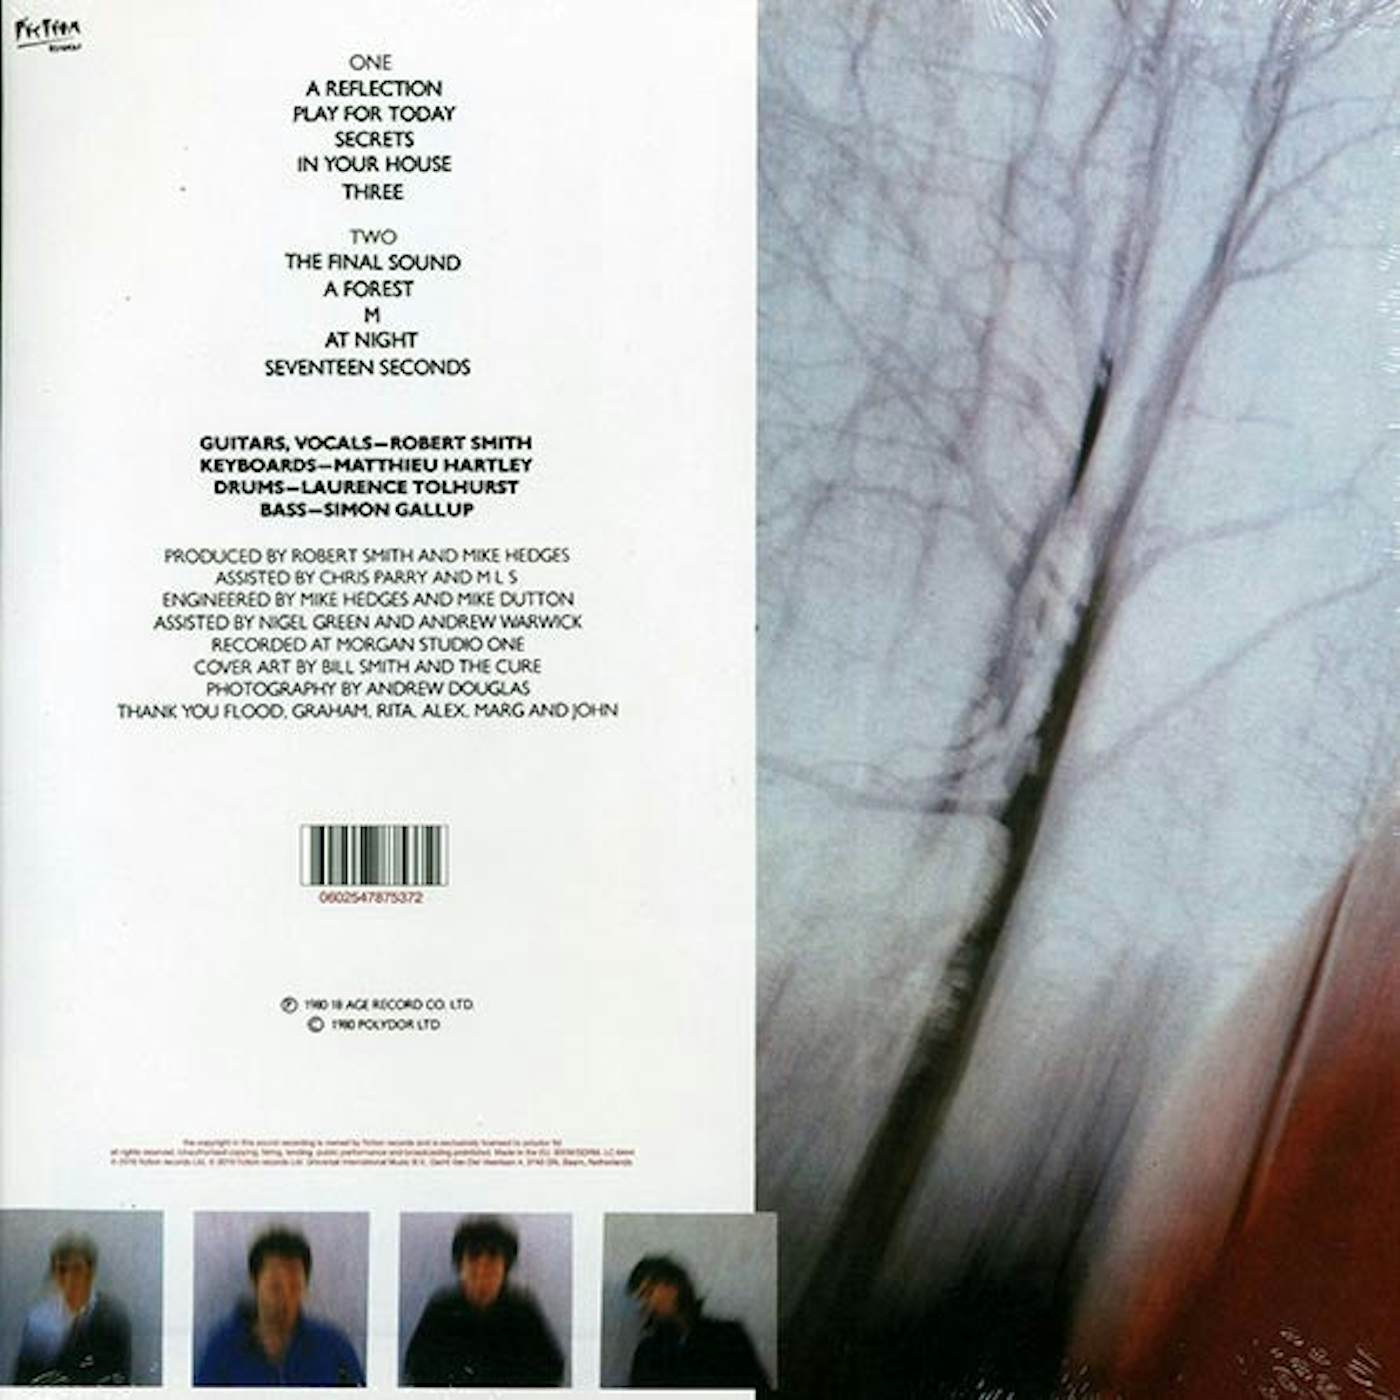 The Cure  LP -  Seventeen Seconds (incl. mp3) (180g) (remastered) (Vinyl)